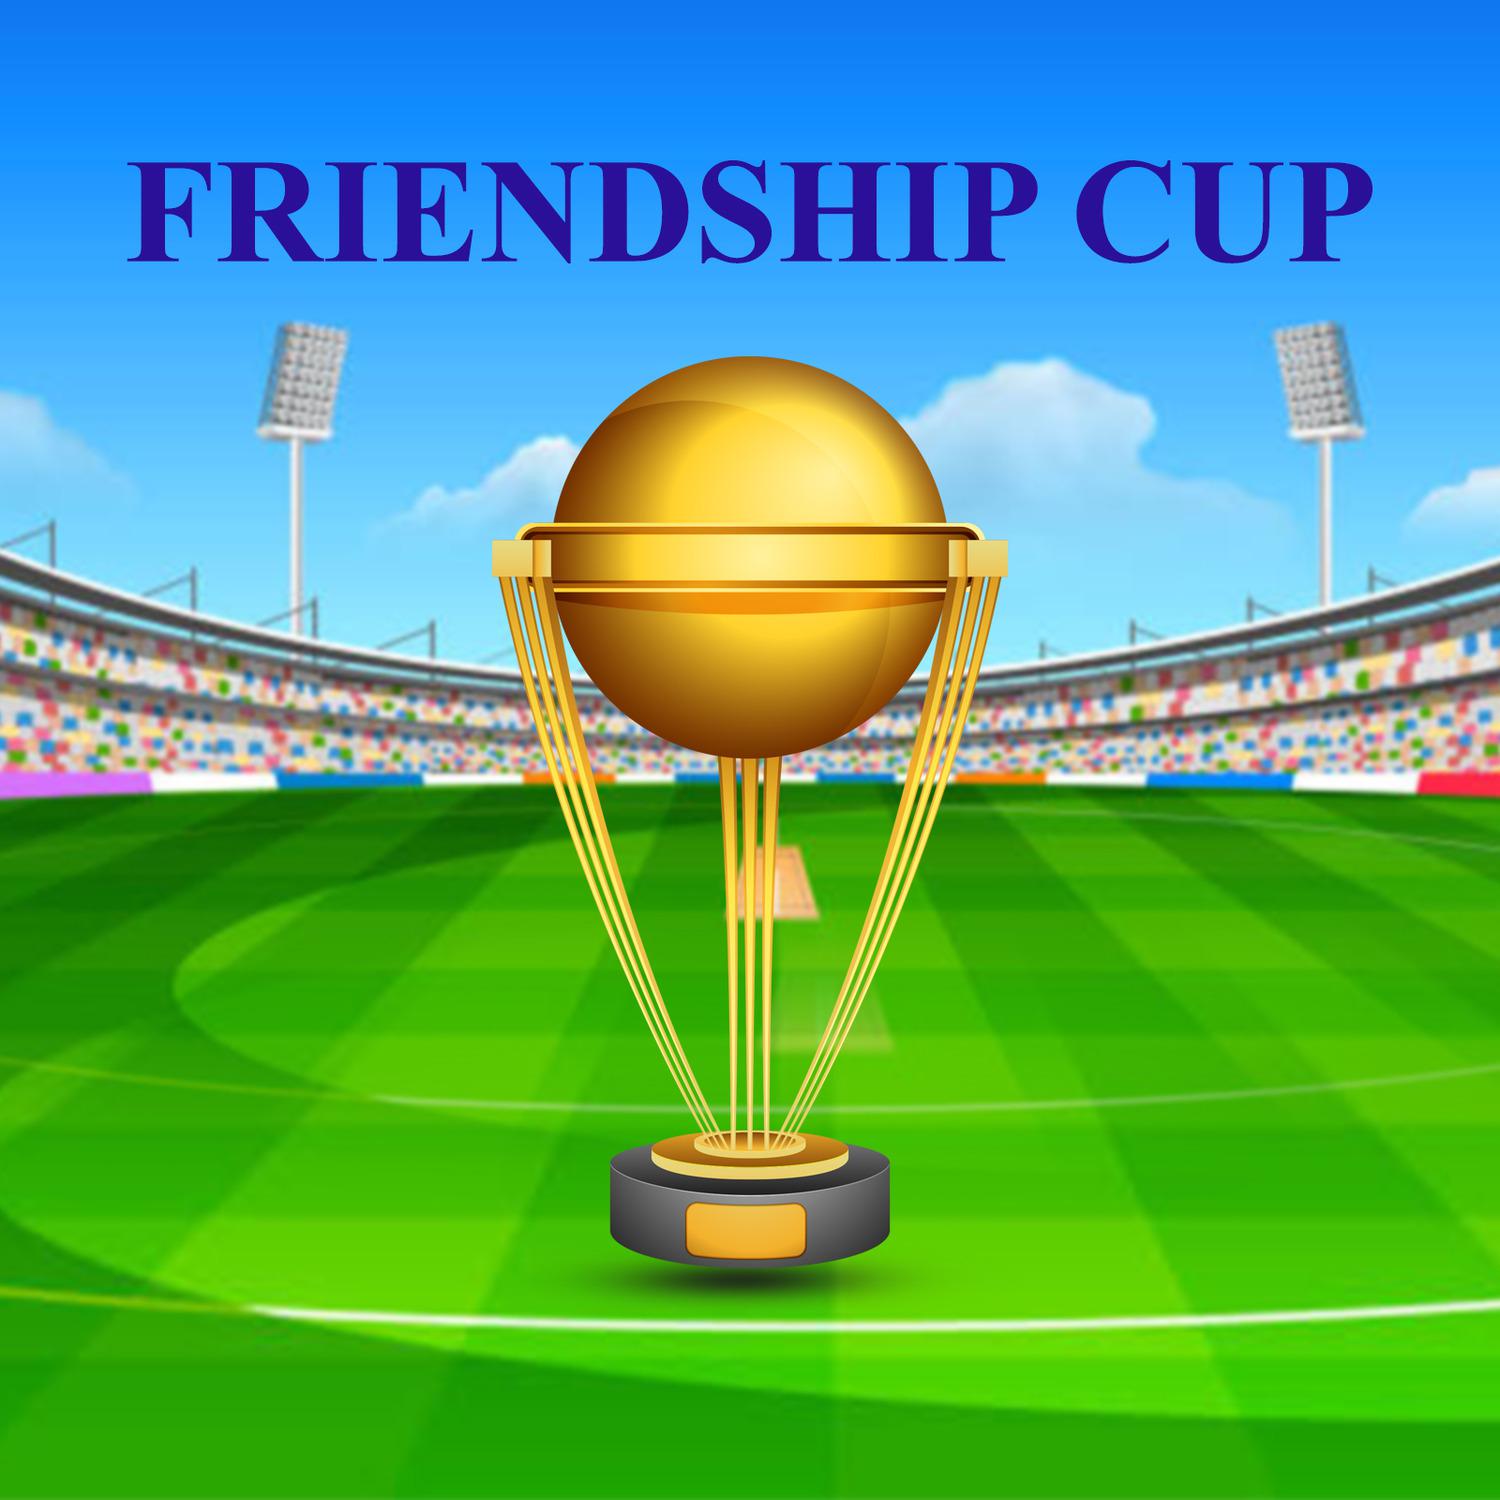 Avdhoot Gupte - Friendship Cup